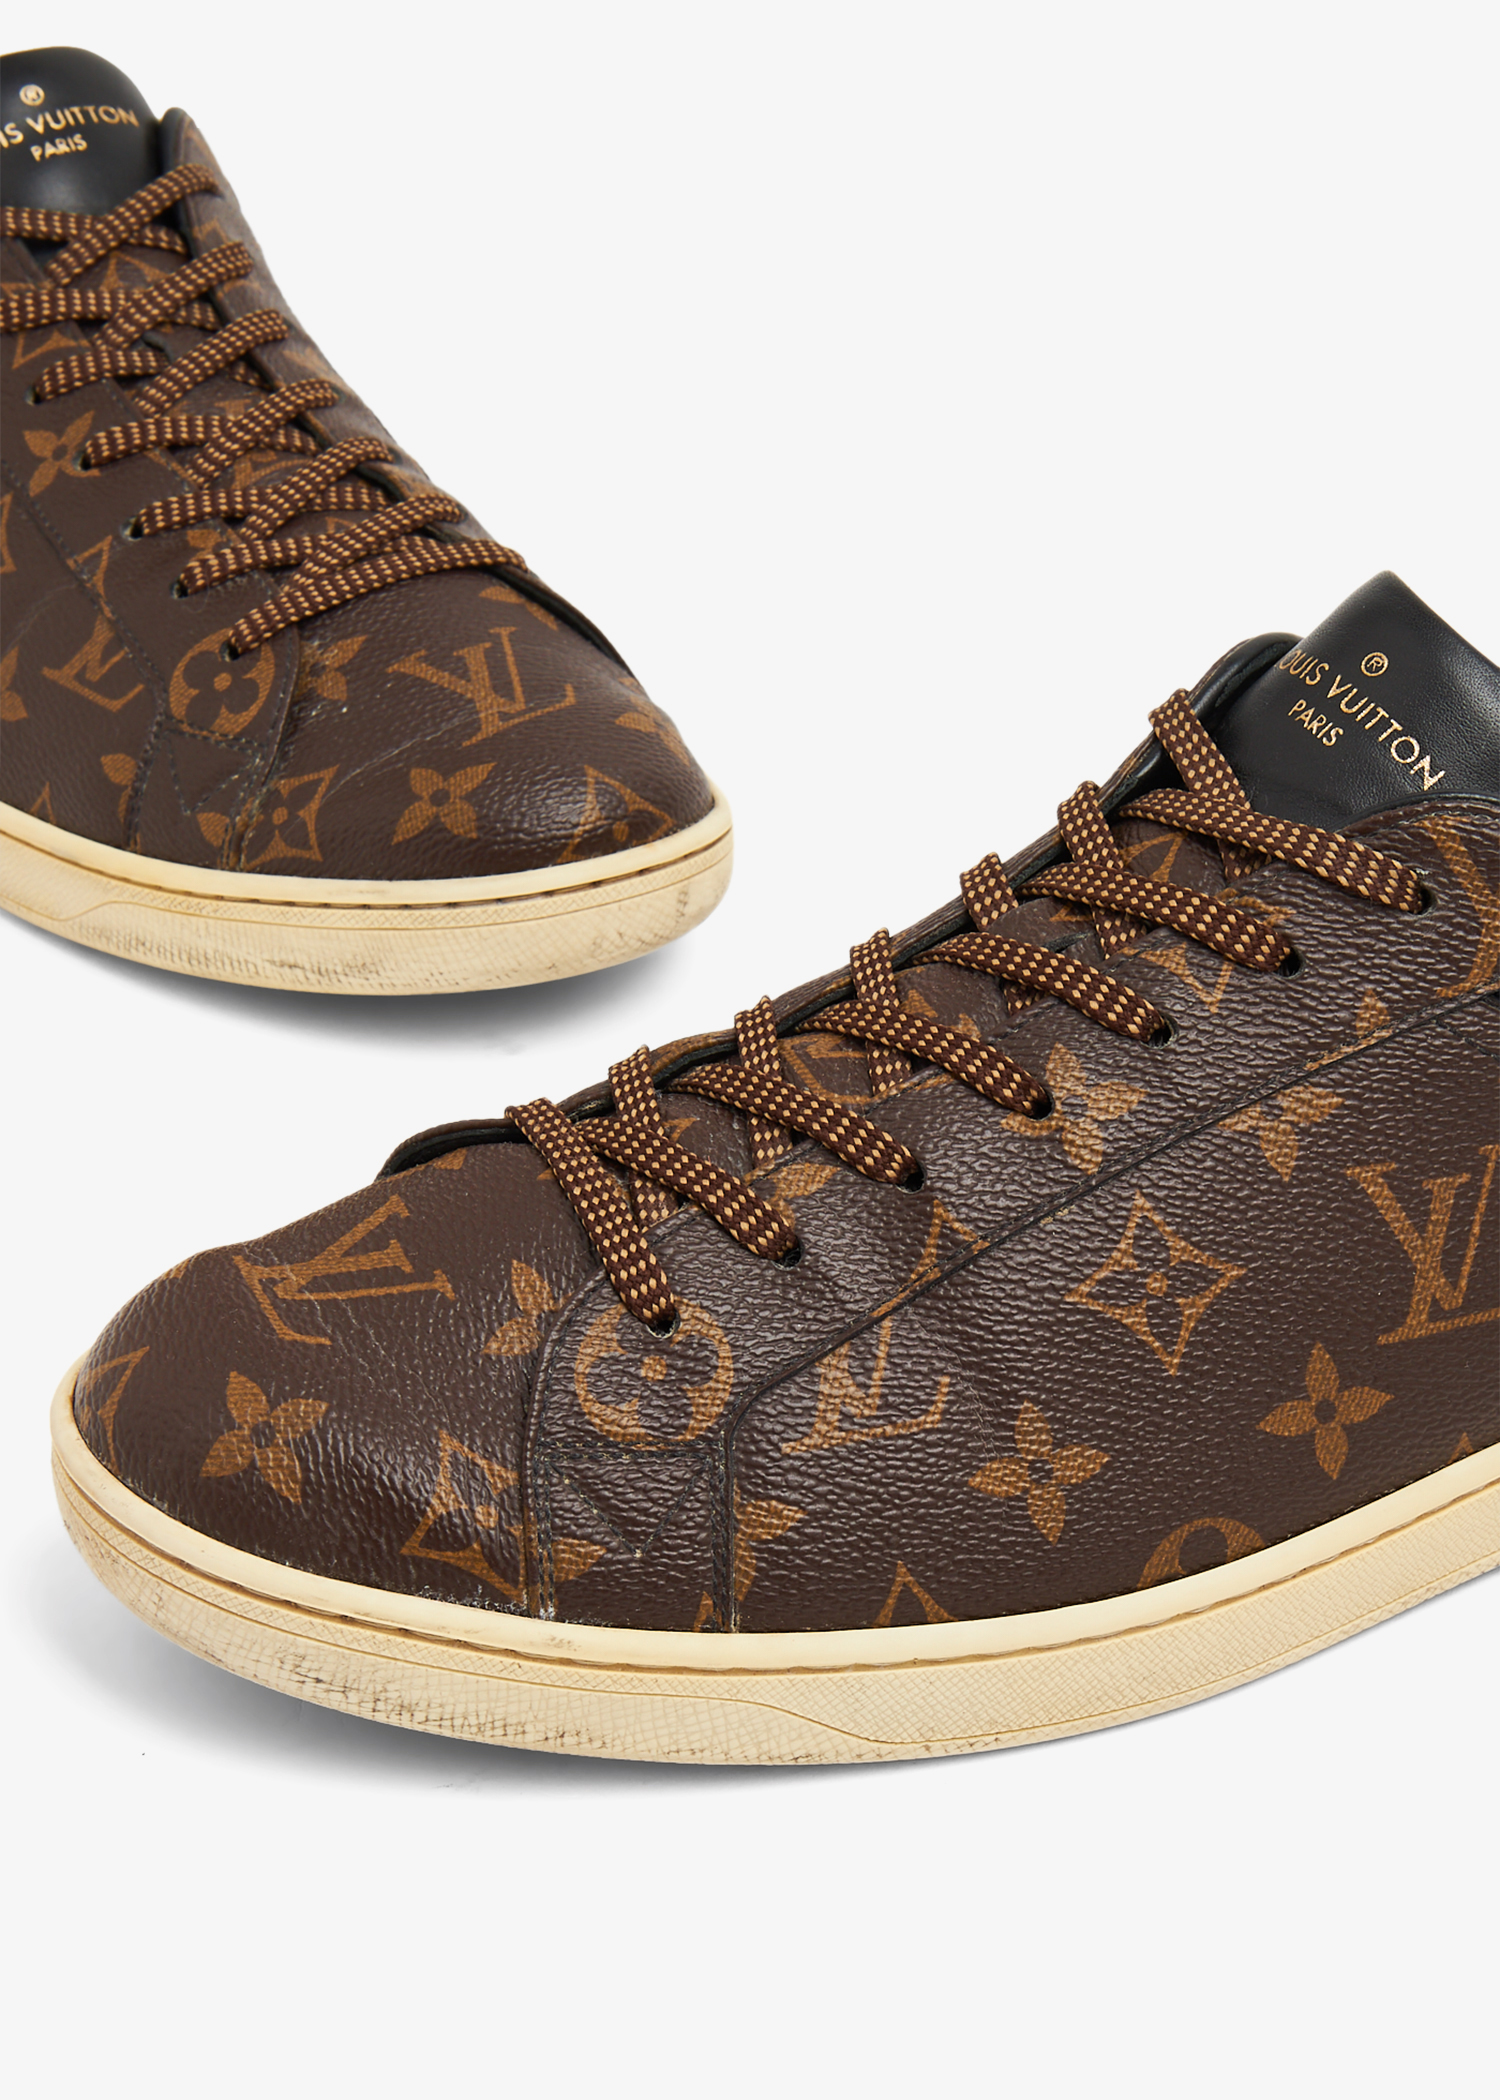 Louis Vuitton Luxembourg 'Brown